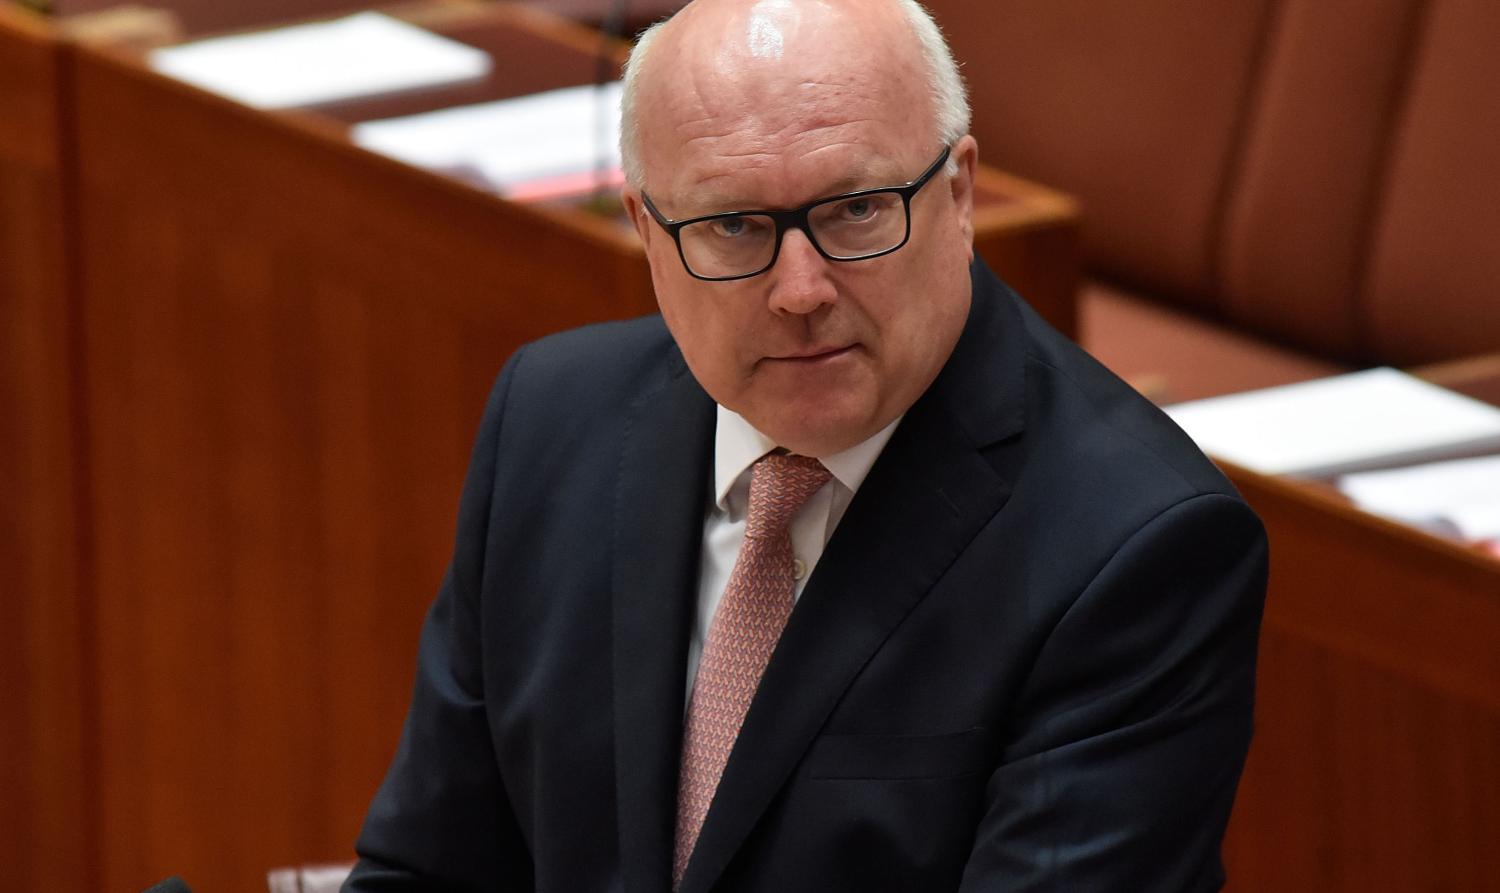 George Brandis in the senate chamber last month (Photo: Michael Masters/Getty)